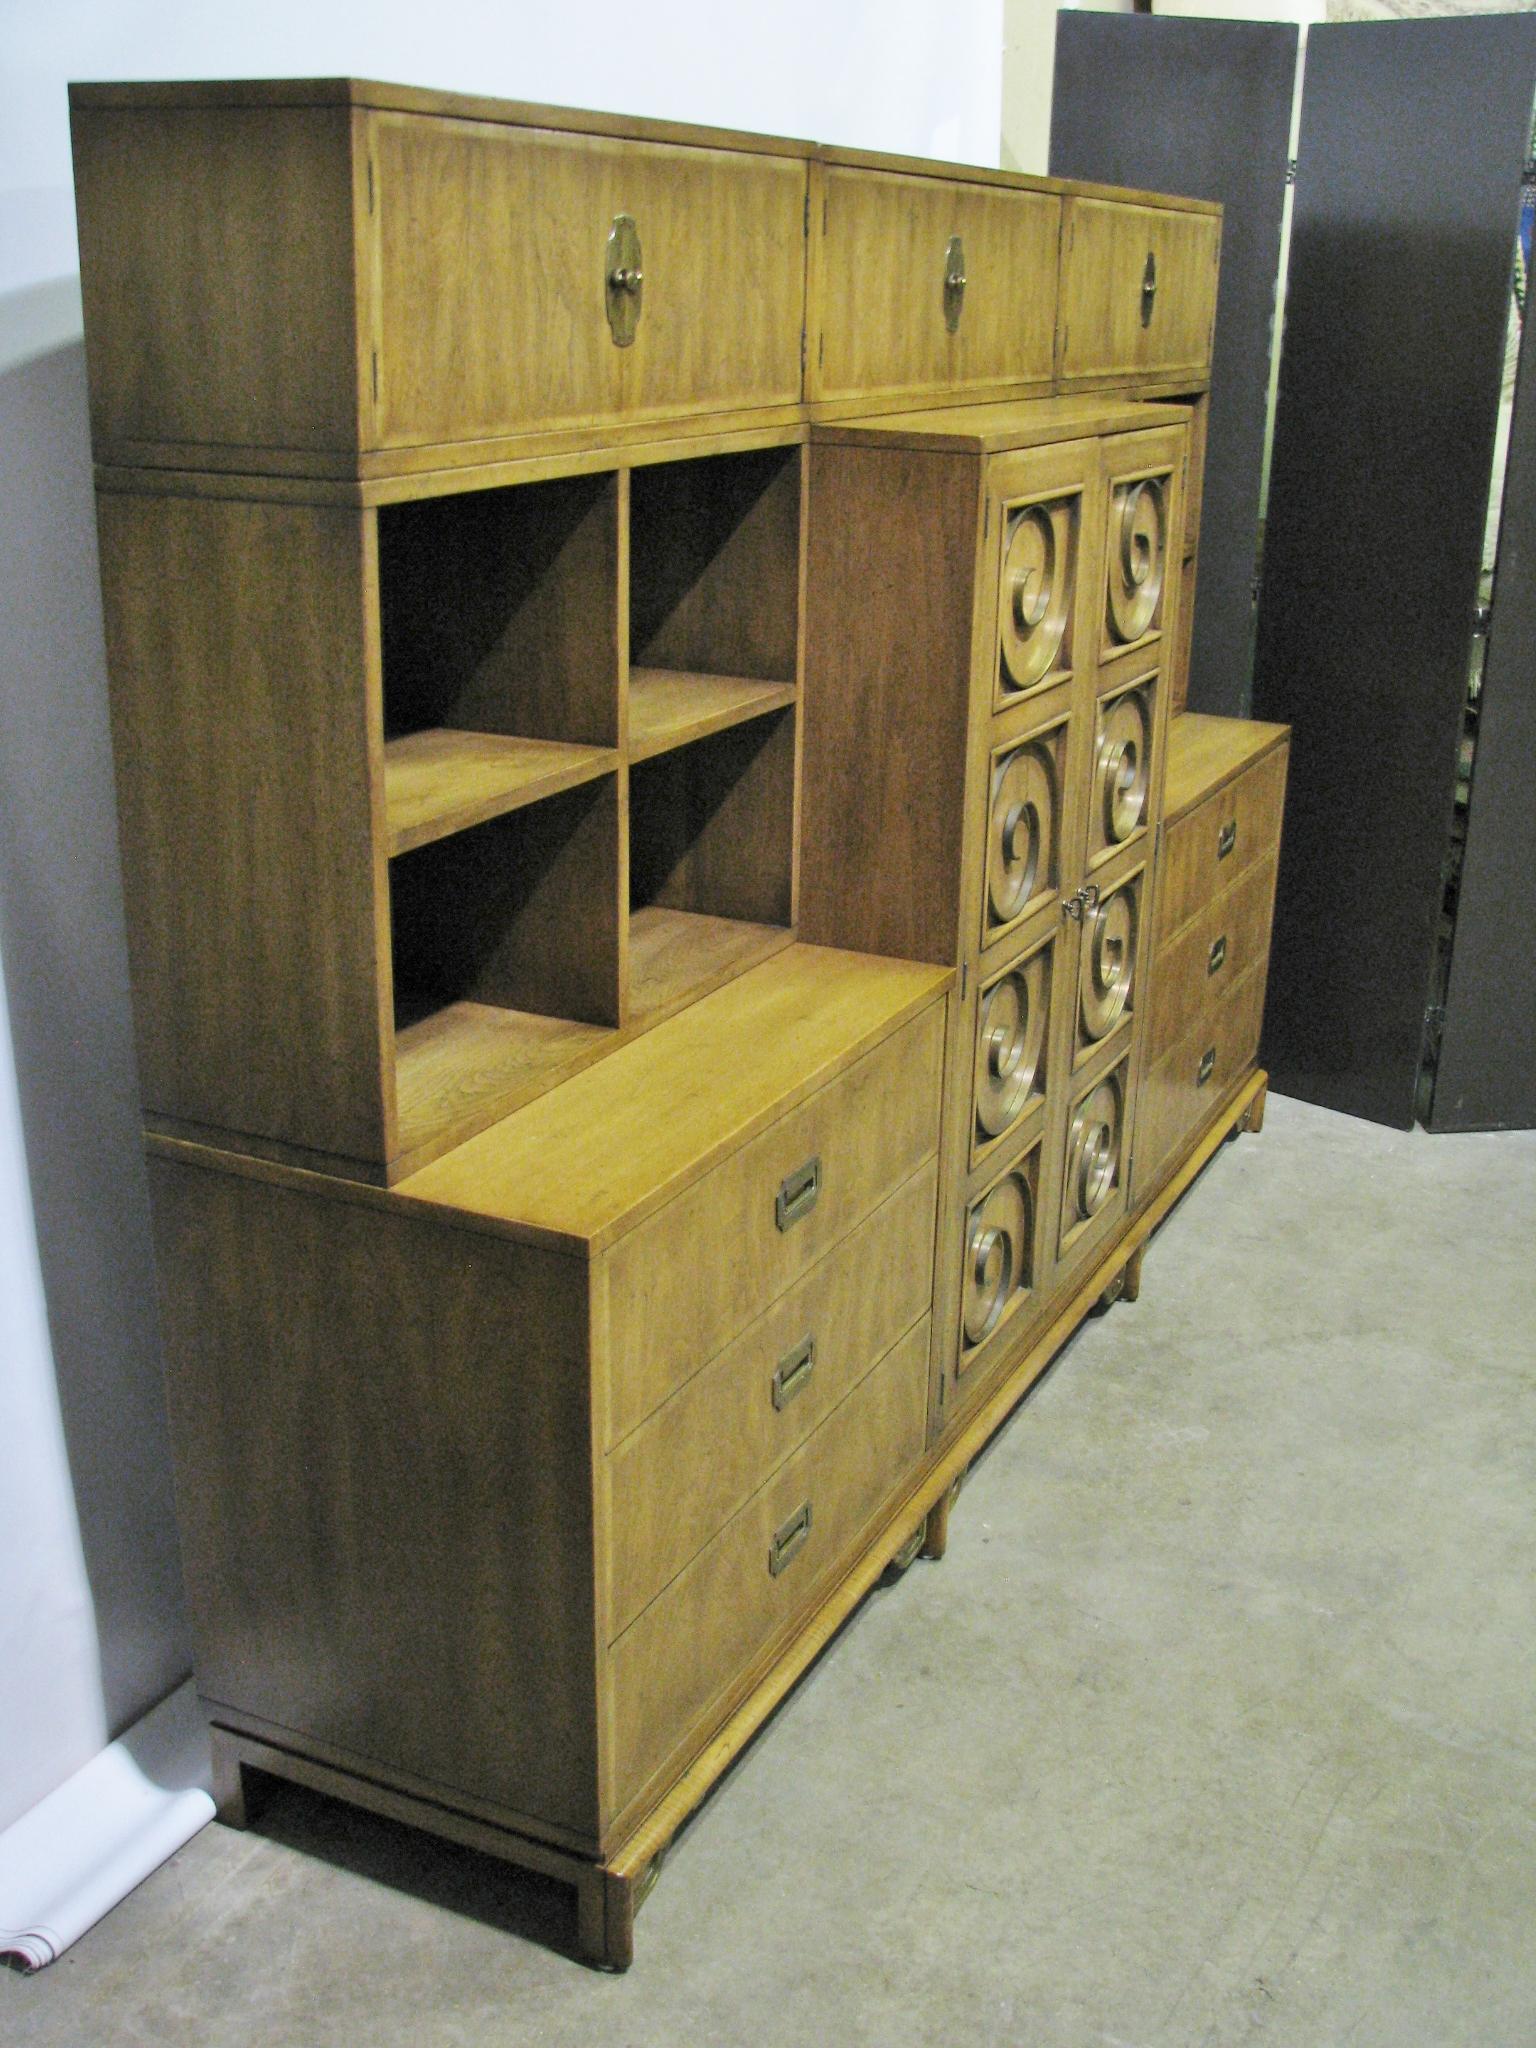 Unique and rare 1960s, nine-piece wall unit by Mastercraft from the midcentury period. A single base allows for the 8-pieces to be configured in various ways using all or just a selection of the components. The feet have an Asian-inspired motif,